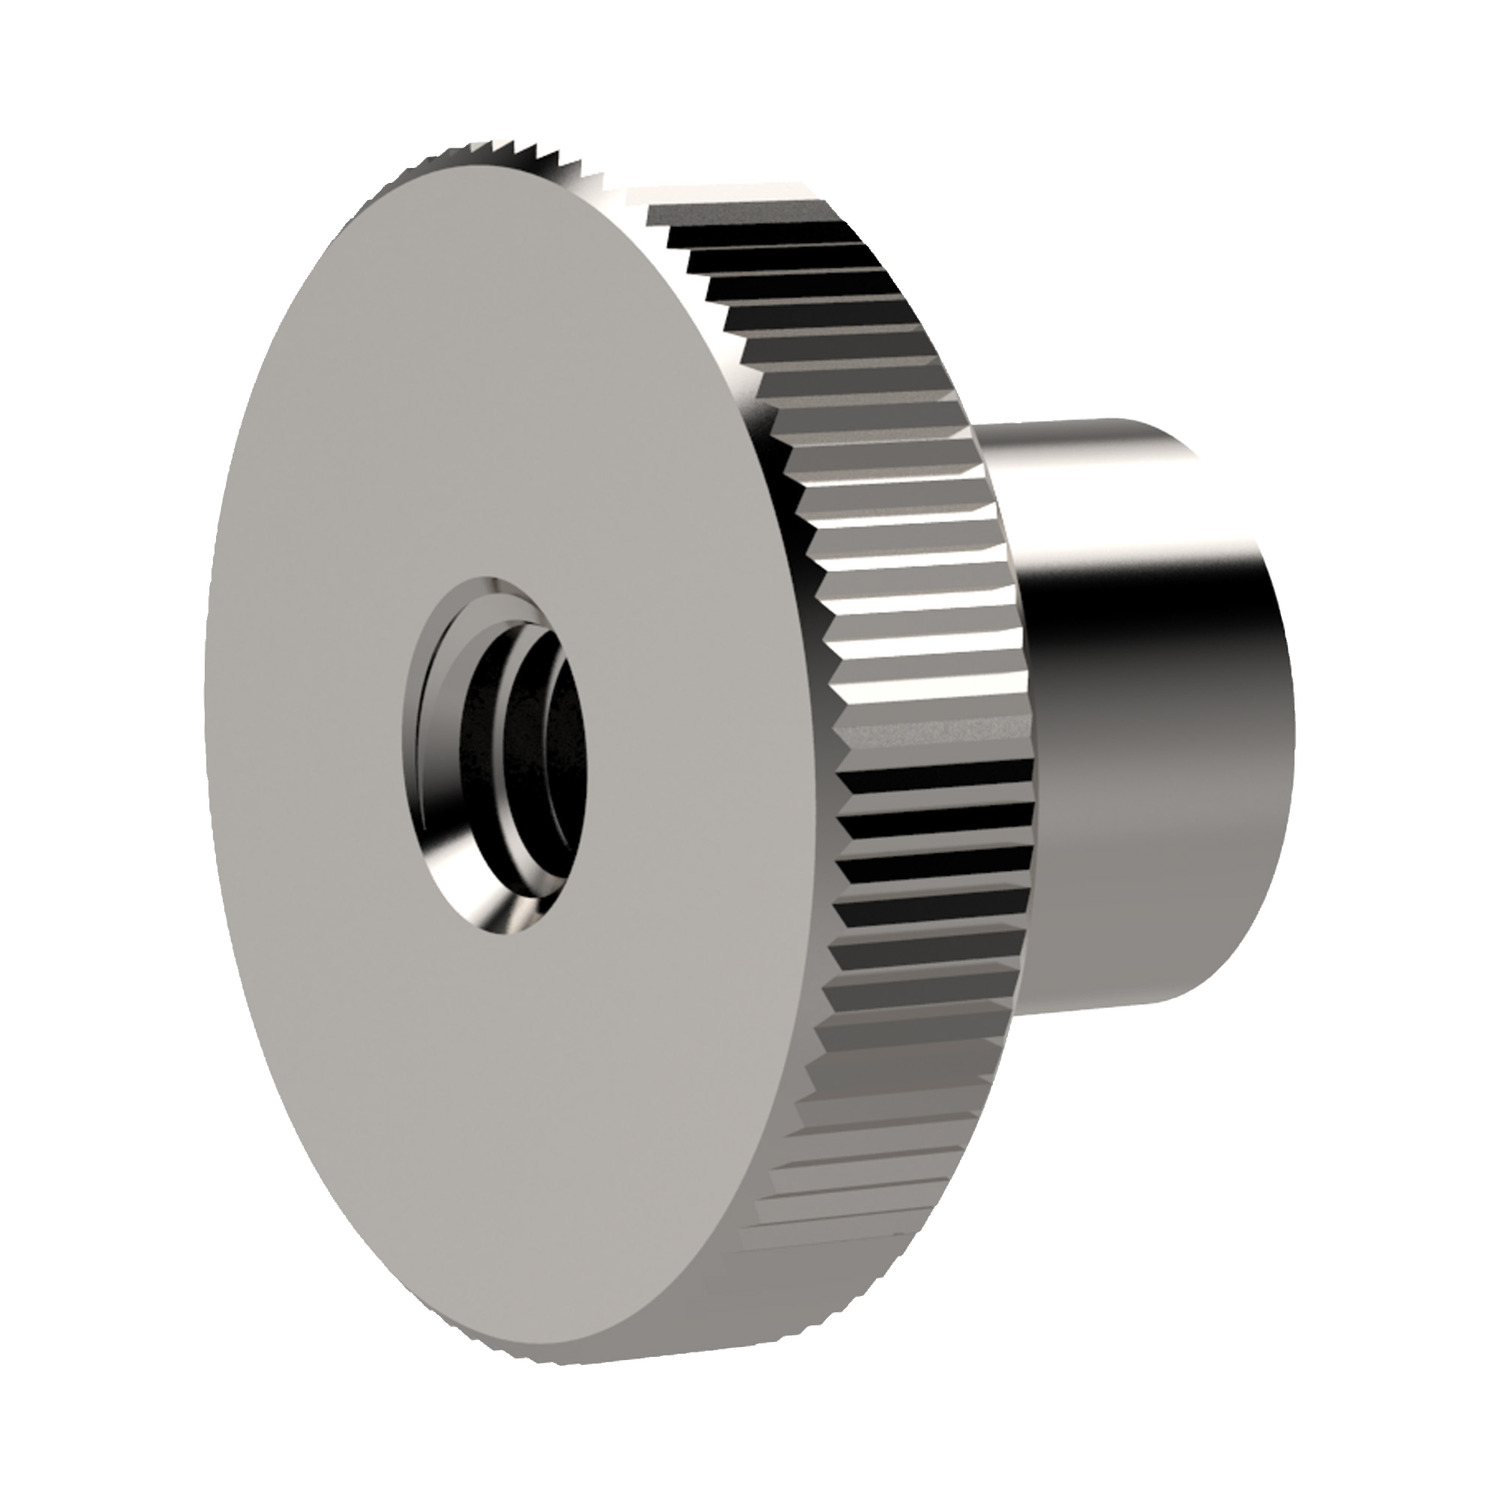 Knurled Nuts Knurled thumb nut with collar comes in stainless steel and with a matte, short-blasted finish.